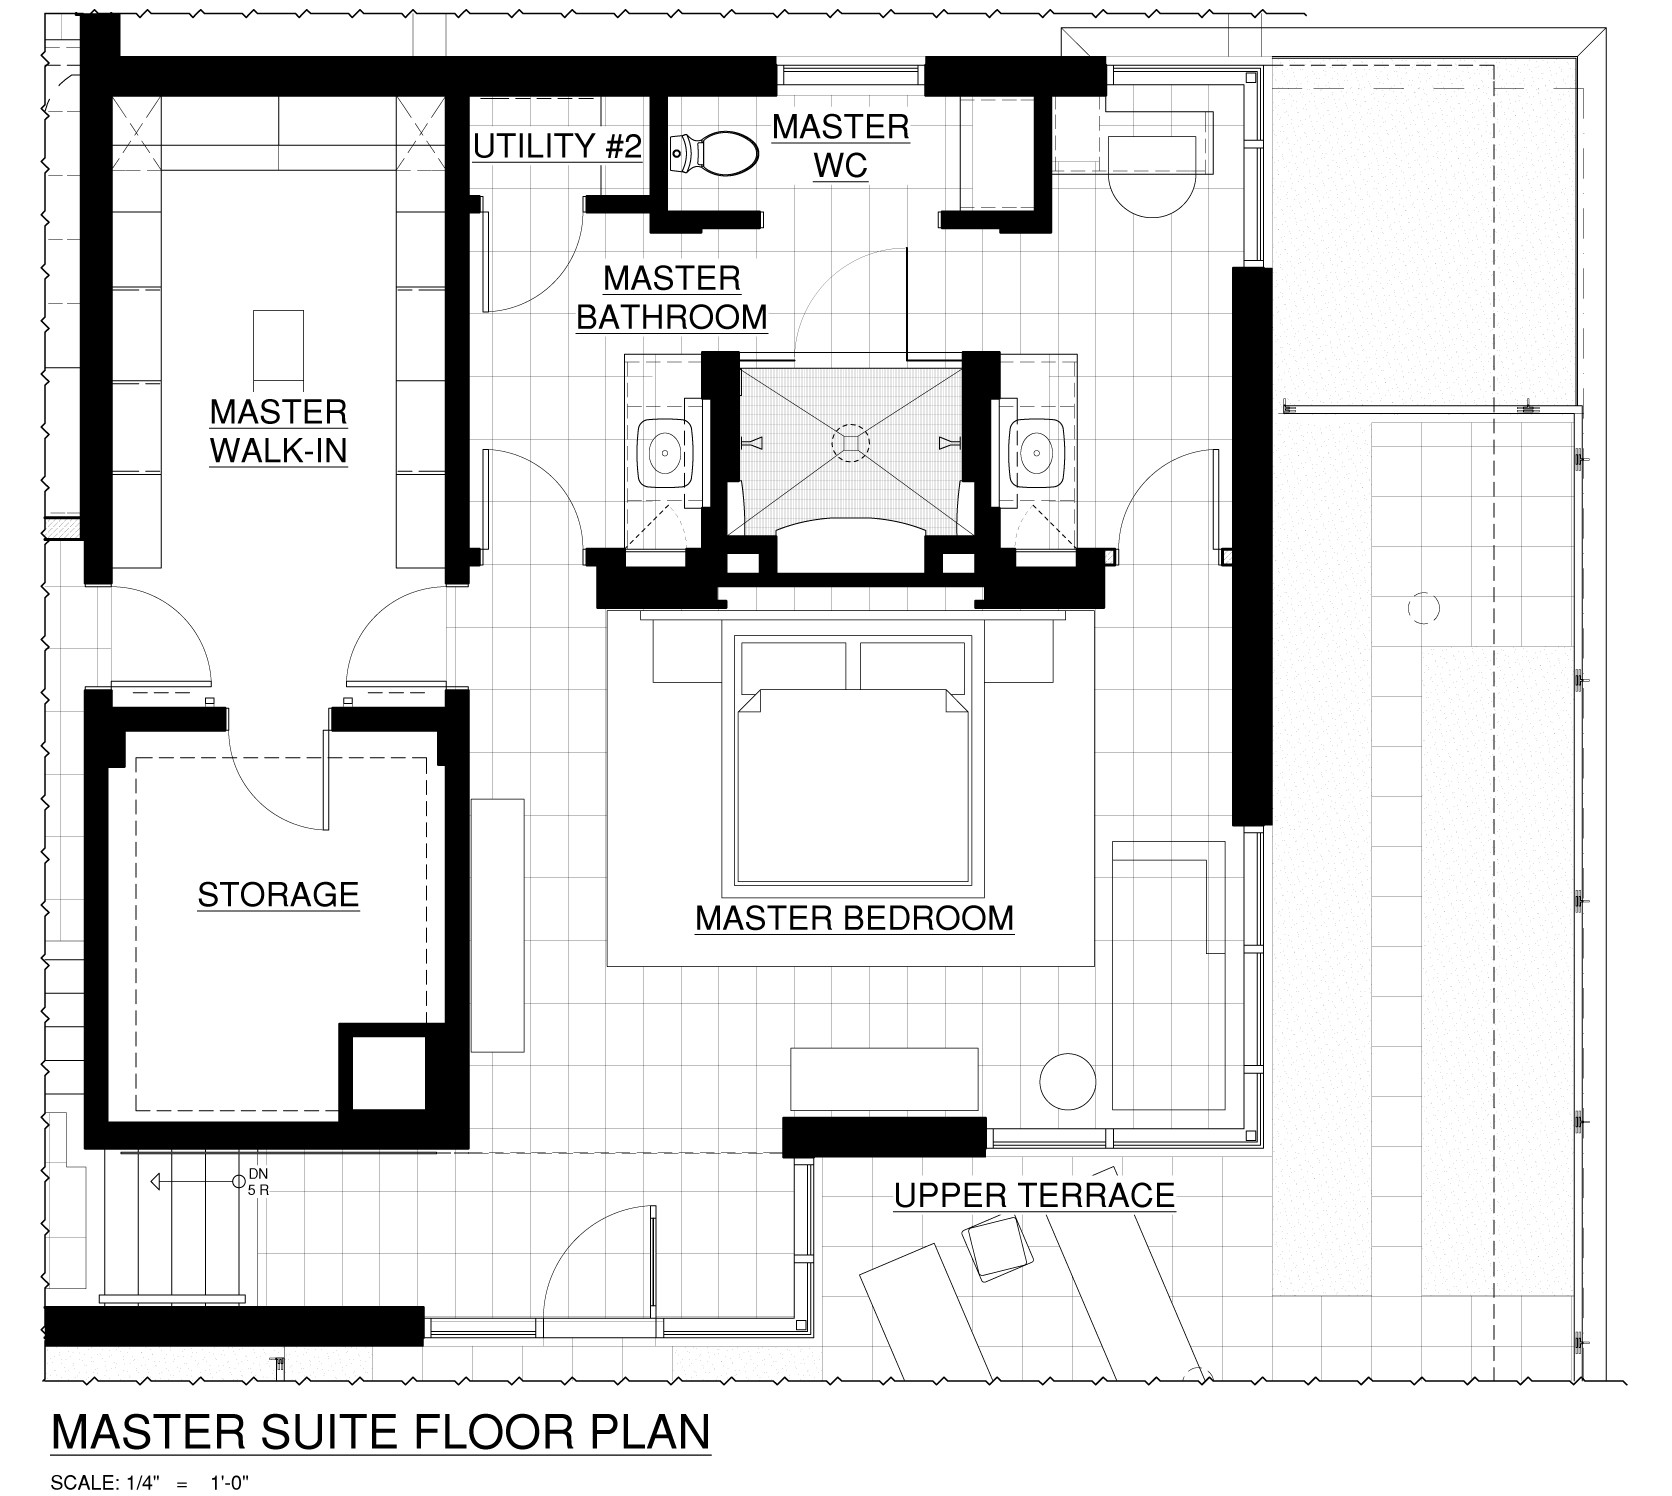 Master Bedroom Suite Floor Plans
 Deep River Partners Ltd Milwaukee WI Architects and